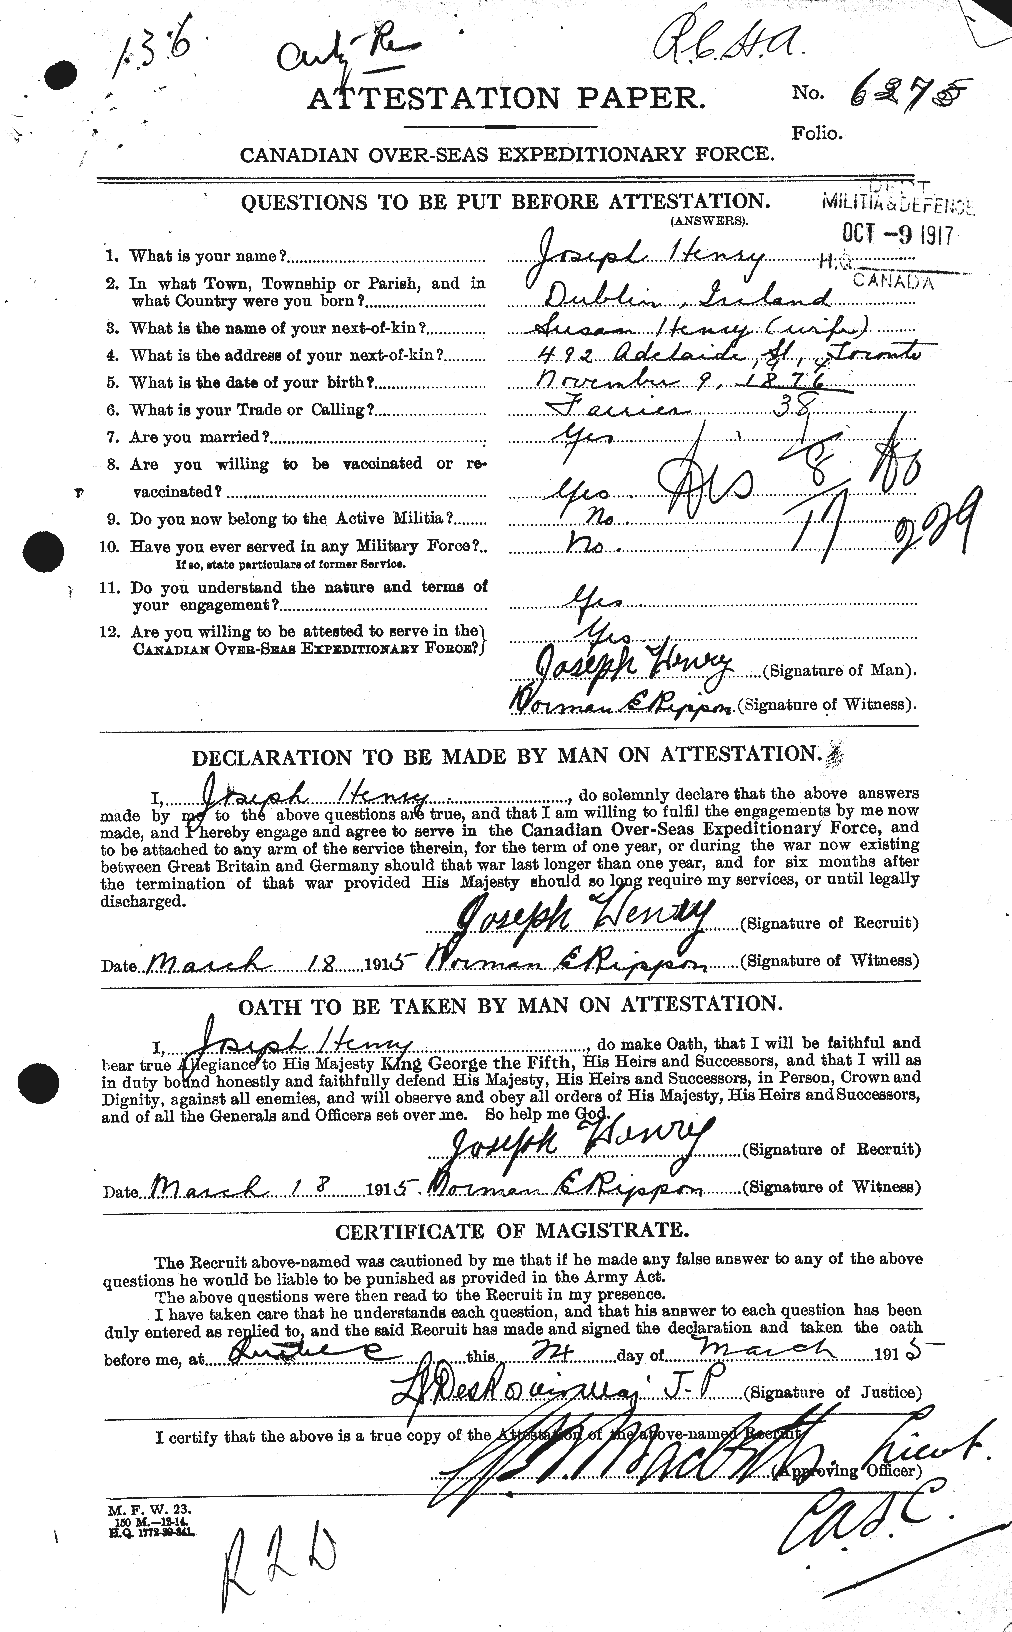 Personnel Records of the First World War - CEF 387643a